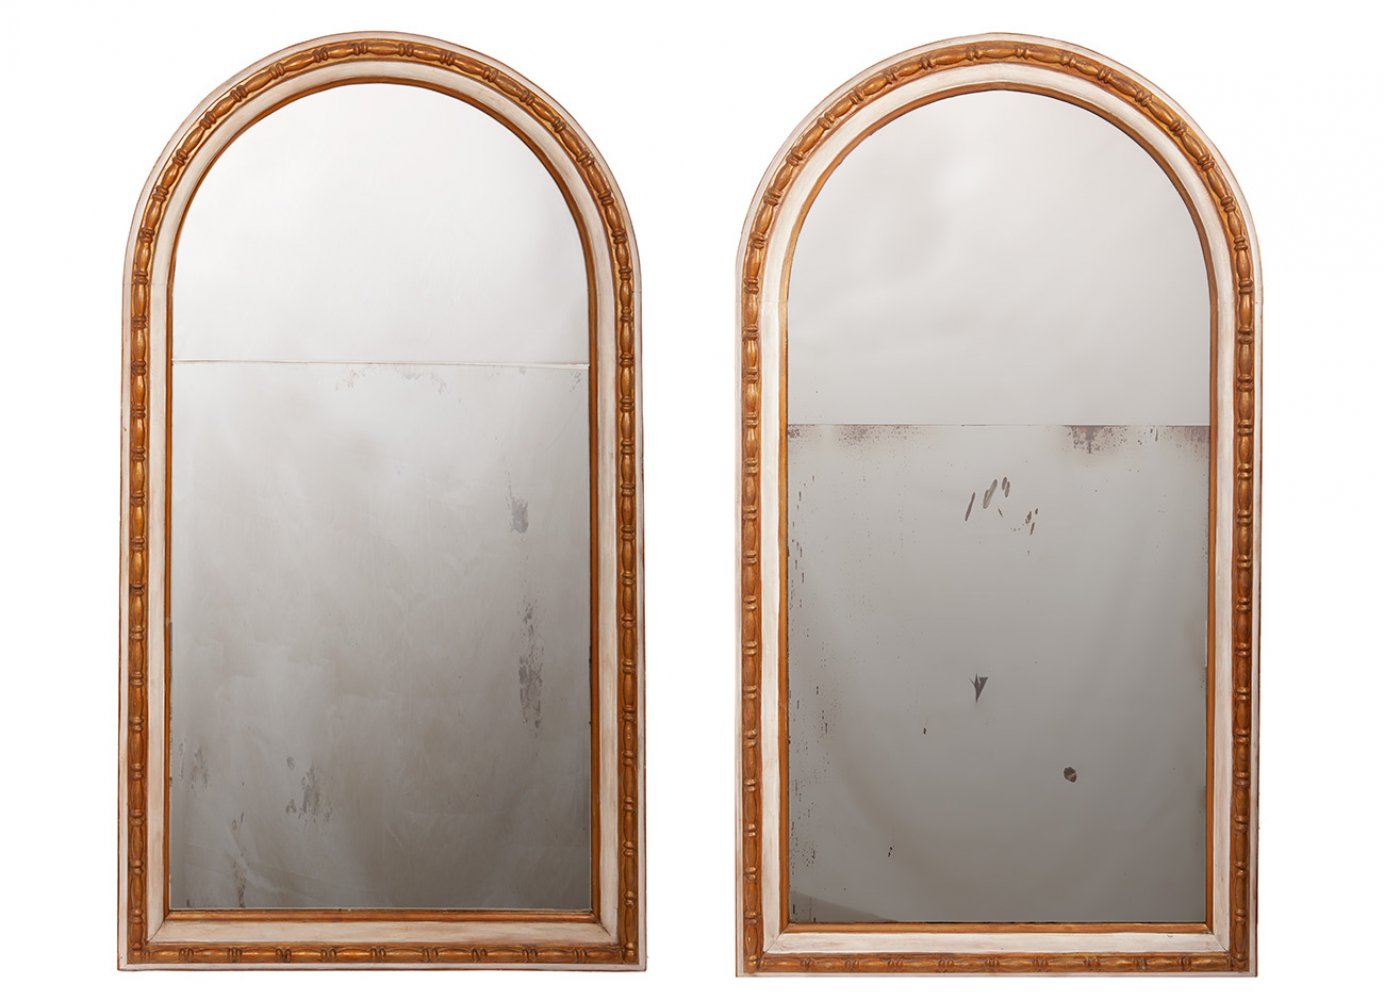 Pair of Italian oval mirrors, 19th centuryMade of carved and polychromed wood.Measurements: 162'5